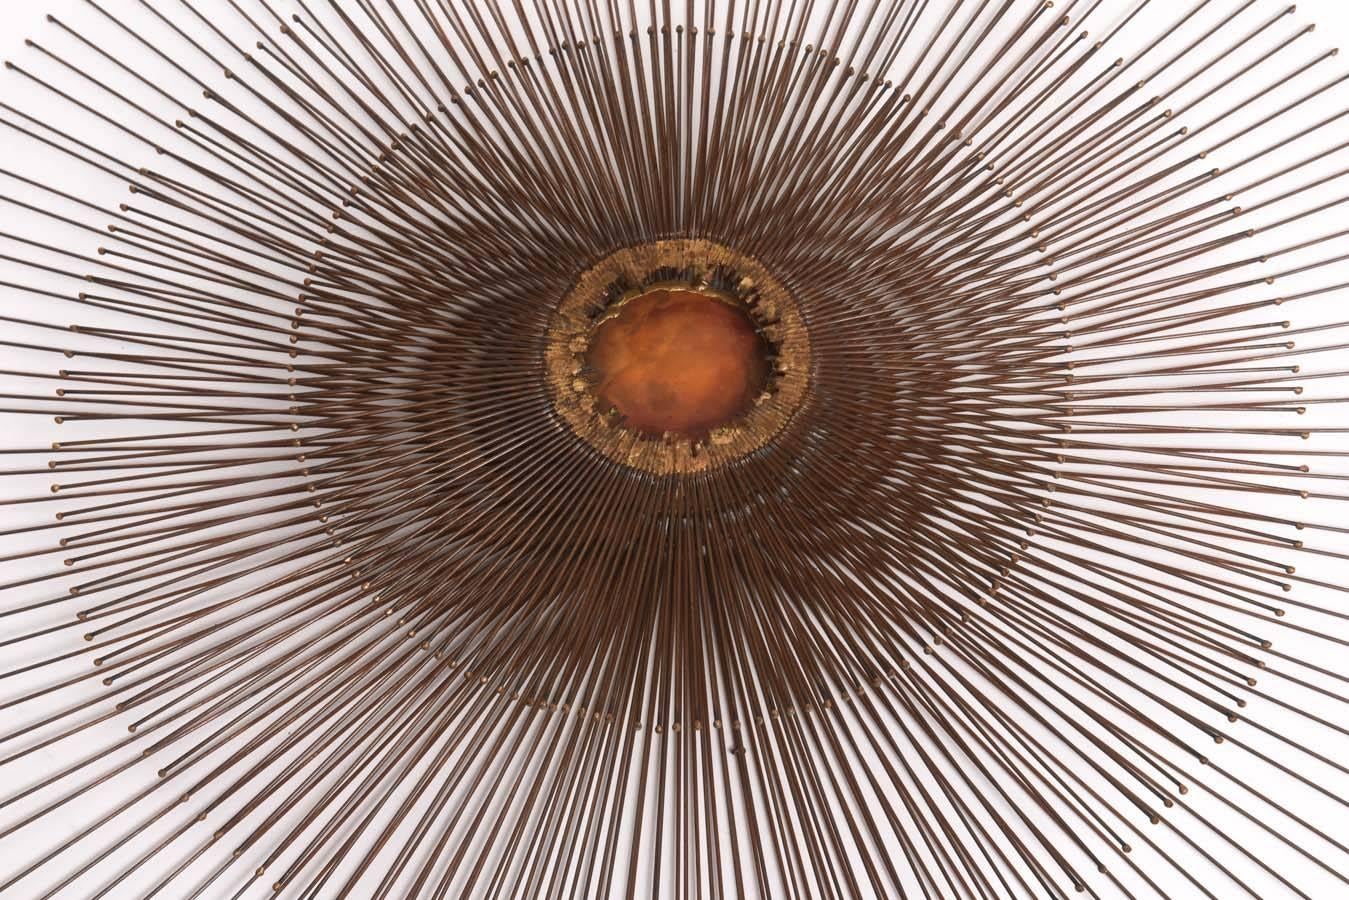 Impressively-scaled, beautifully crafted bronze triple layer sunburst wall sculpture with copper disc center and brass surround by William Friedle.